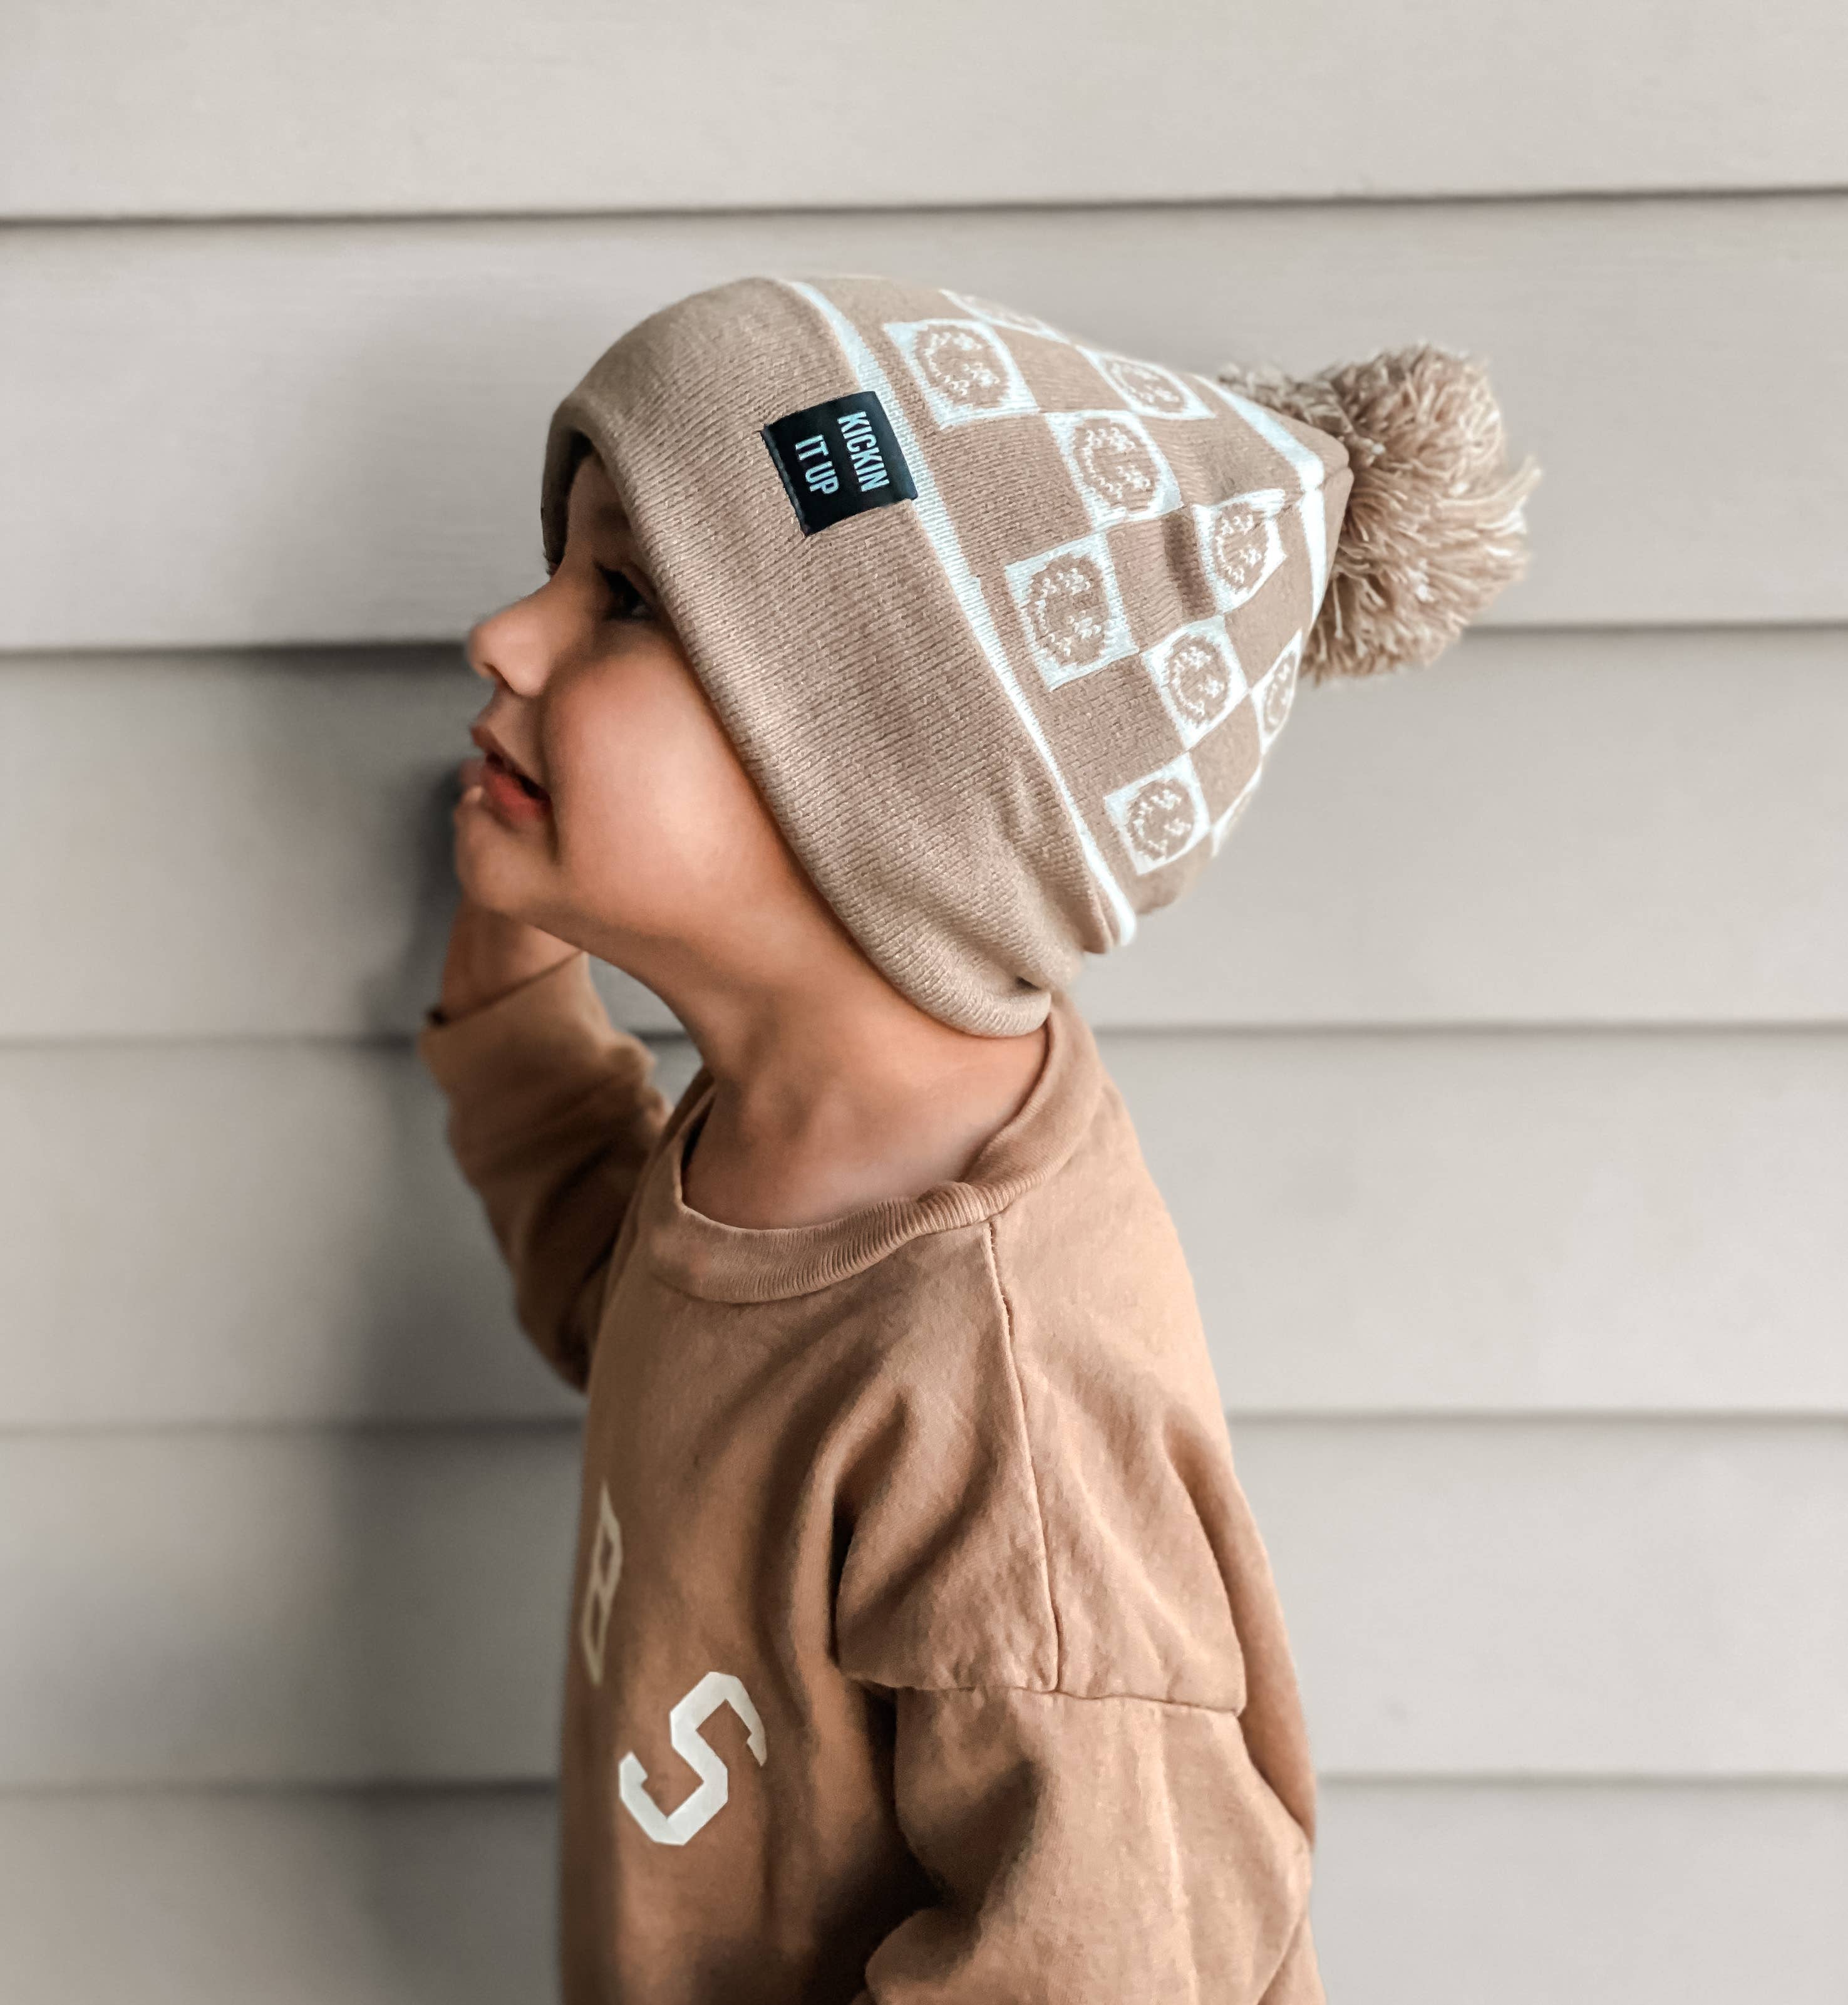 Tan Smiley Check Beanie: Infant 4 Months-18 Months